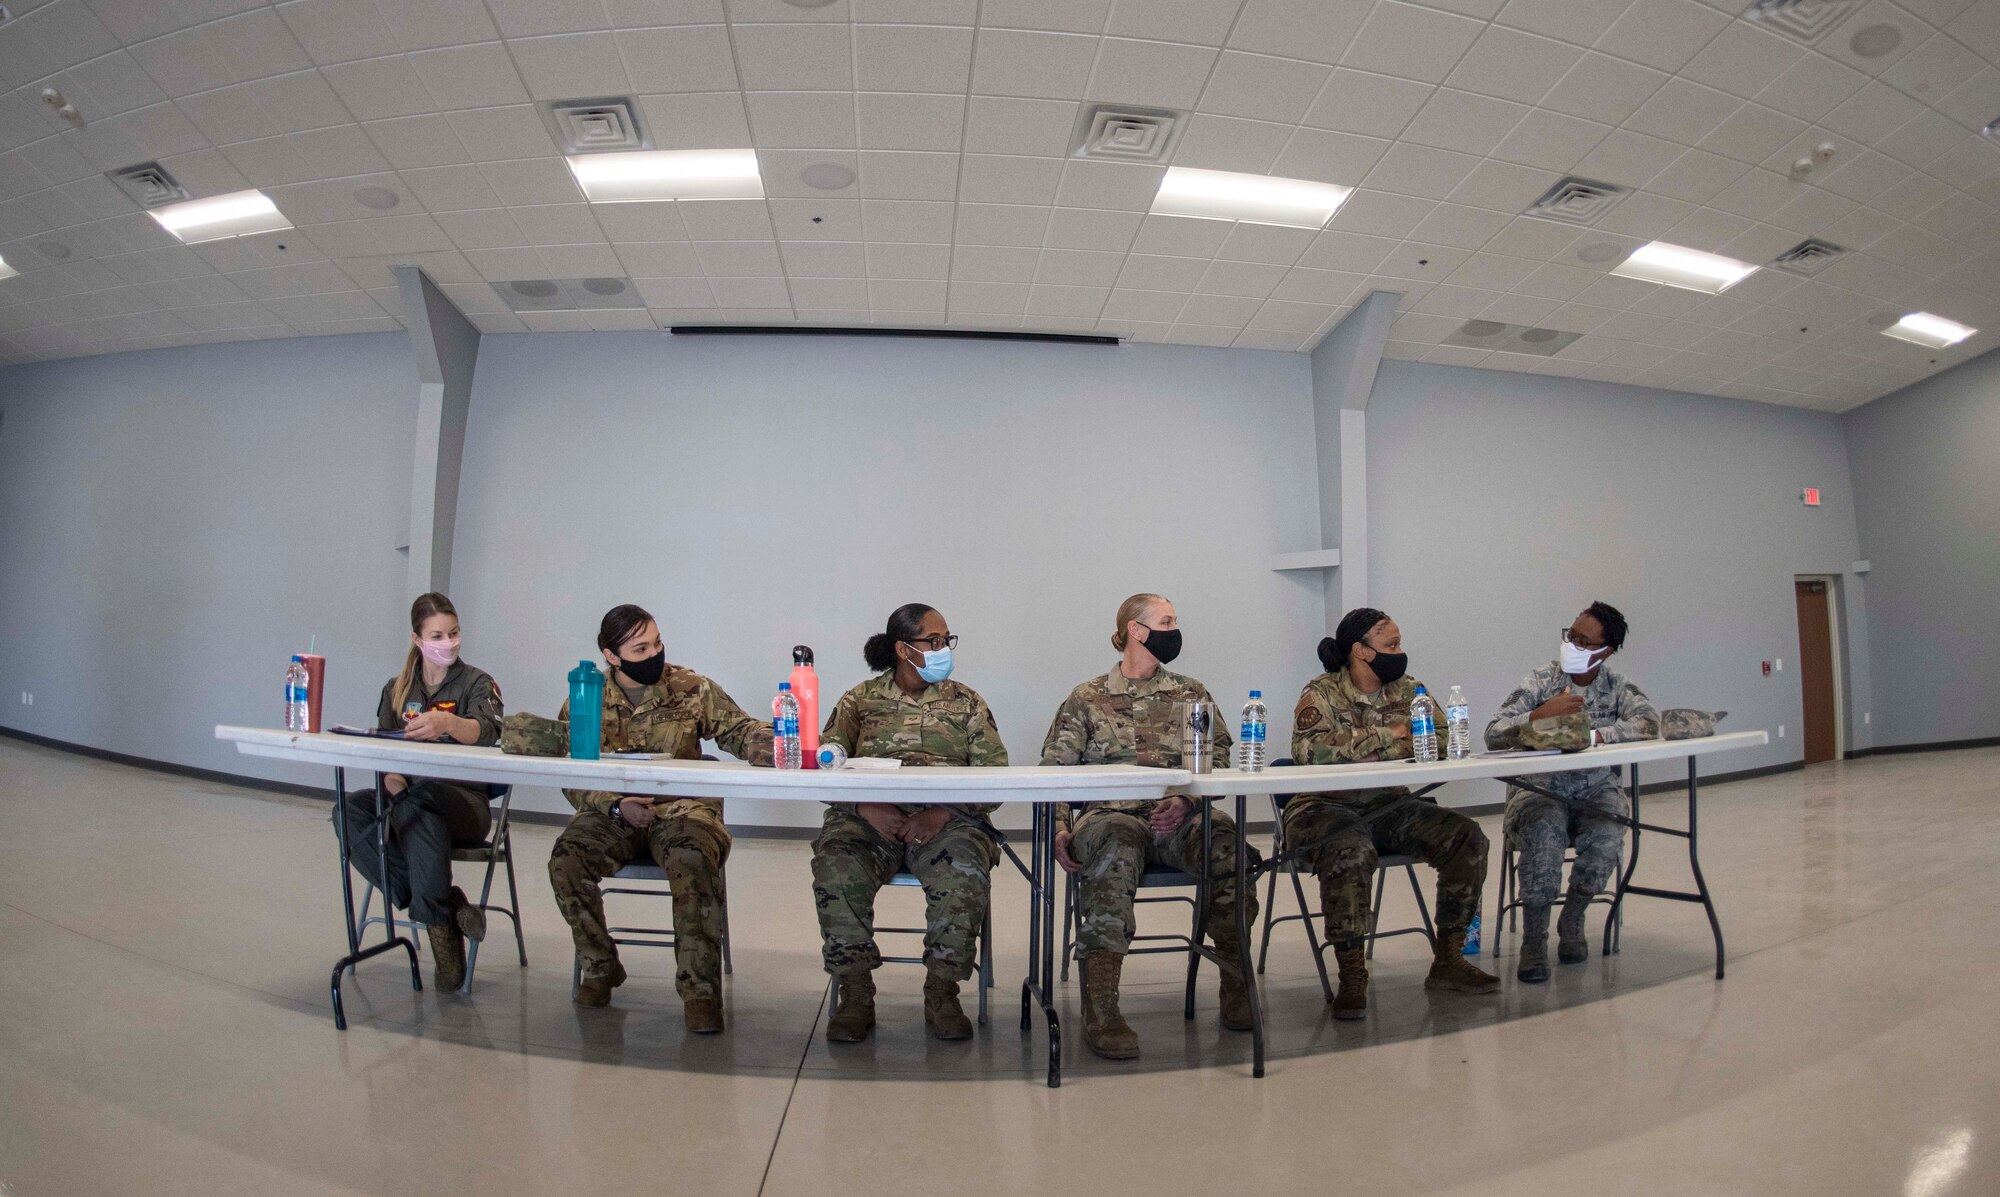 Six female Airmen are sitting at a table and talk with each other.